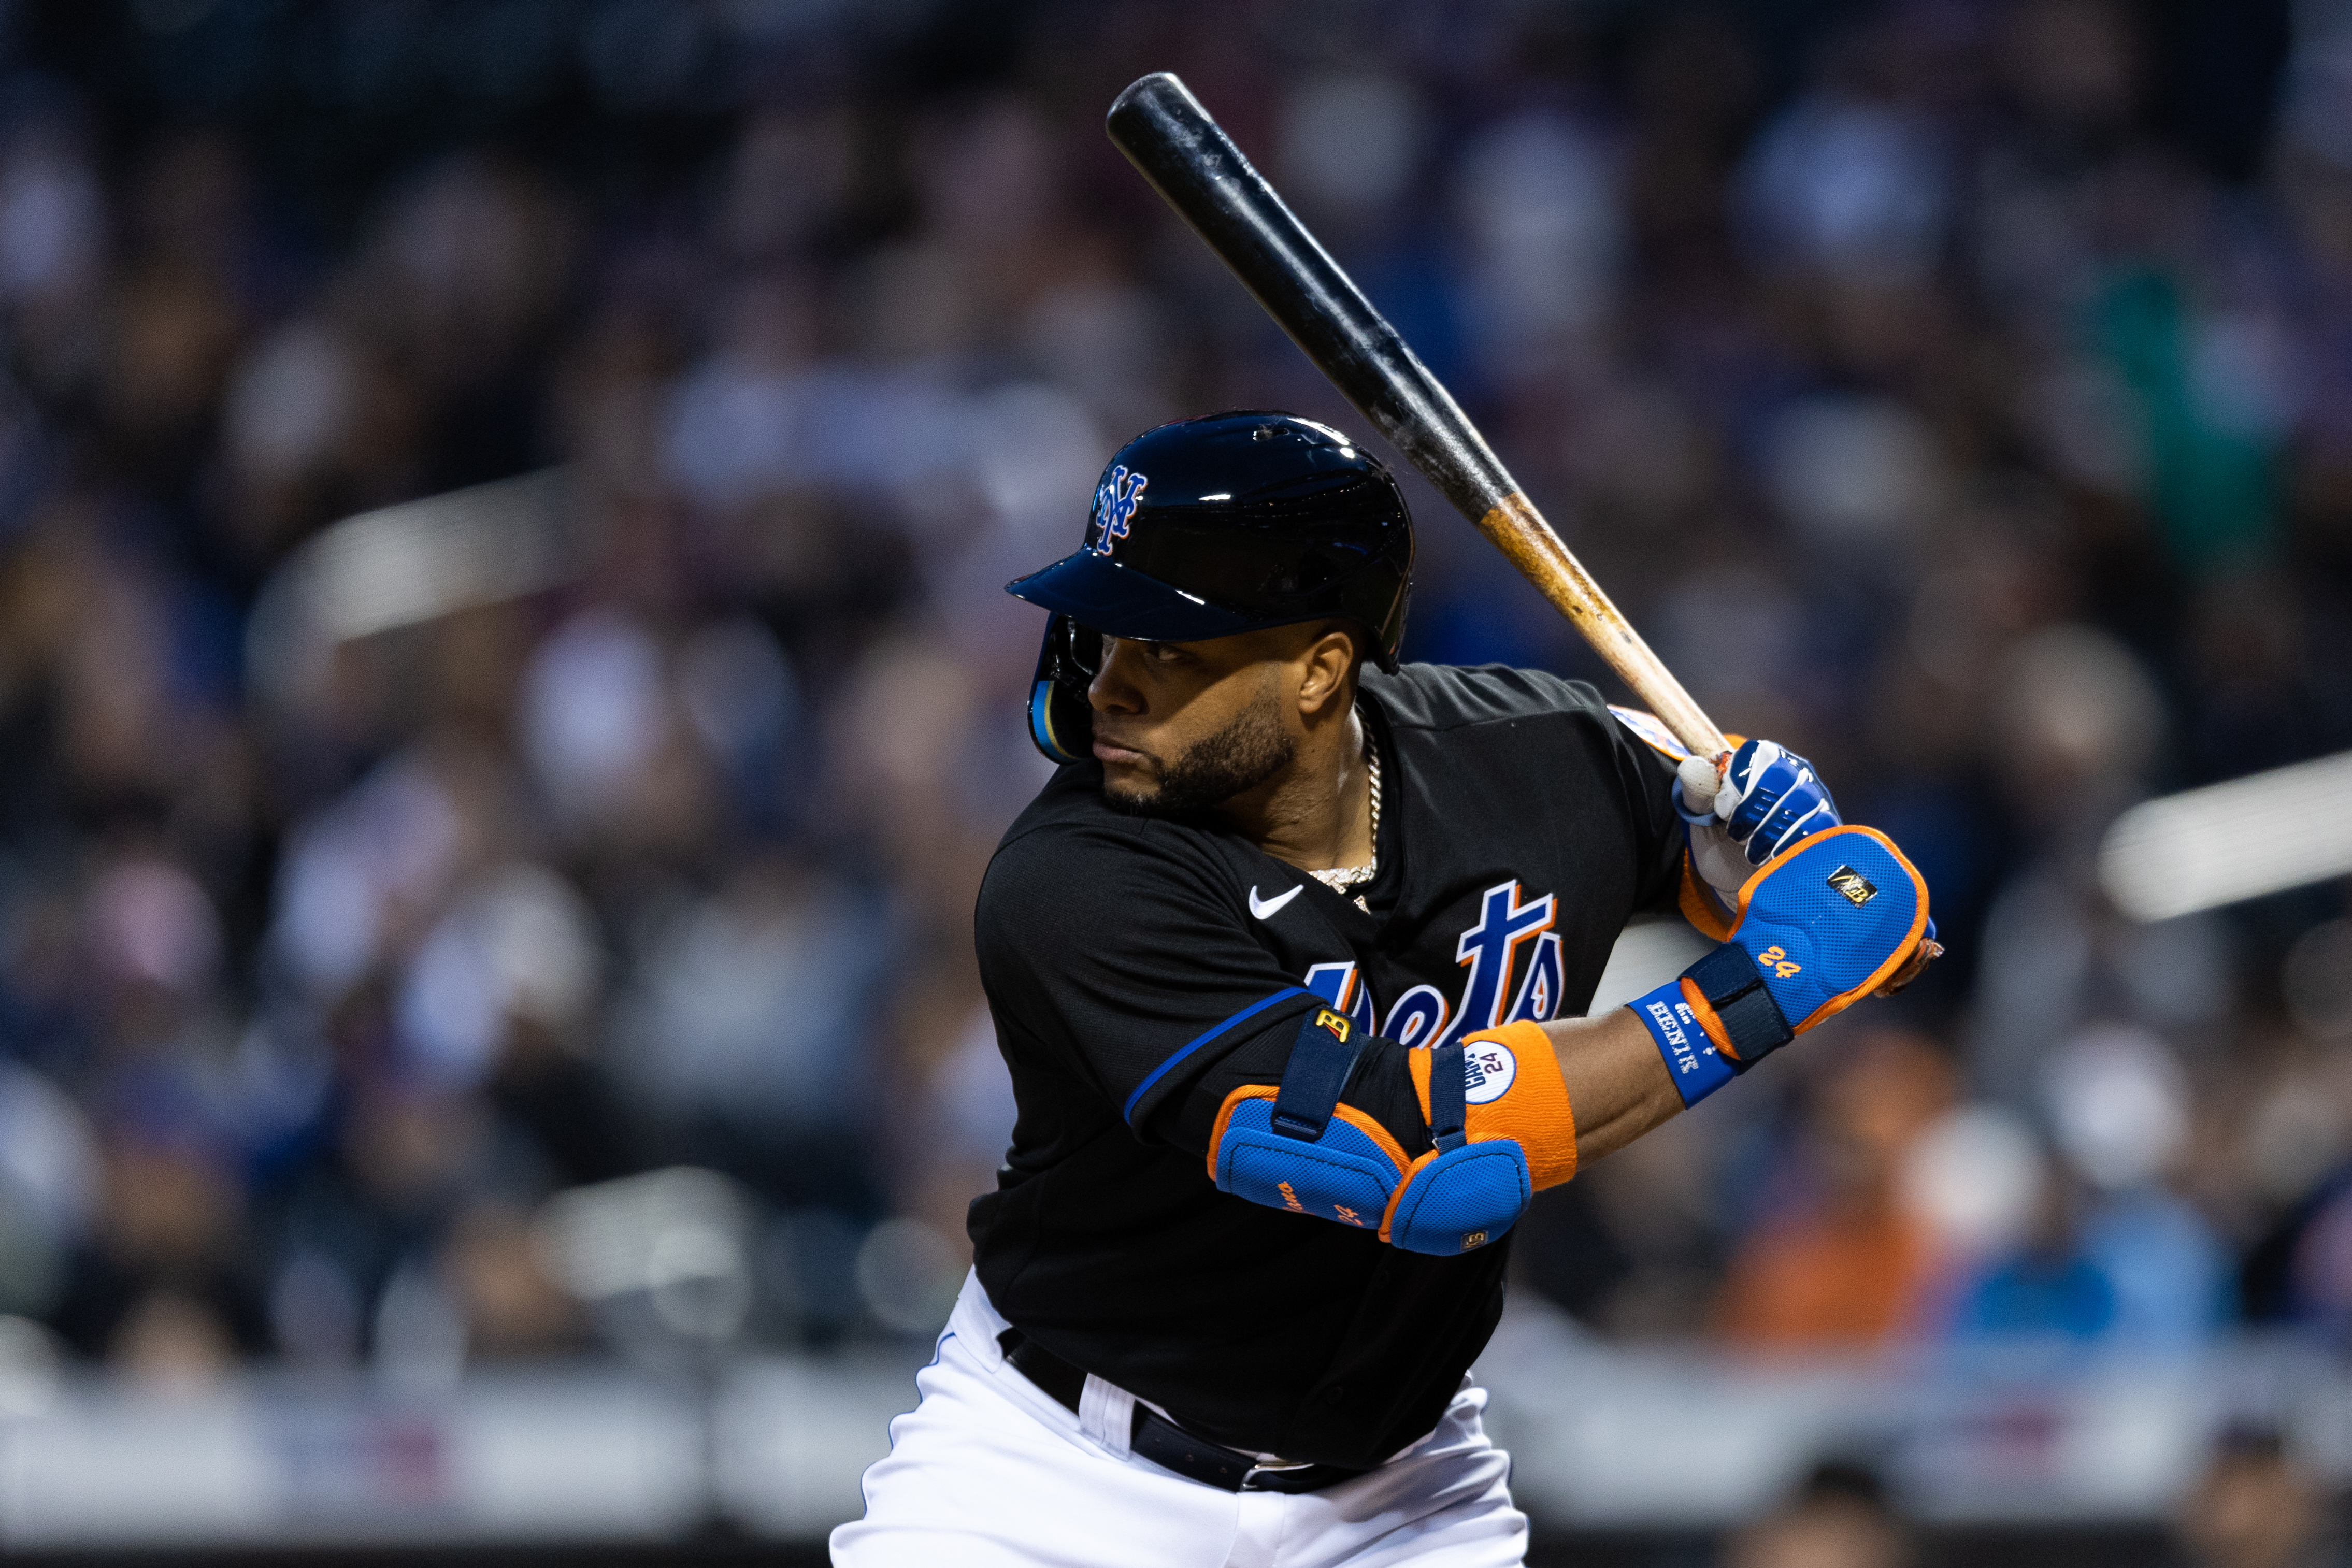 What should the Mets do with Robinson Canó?